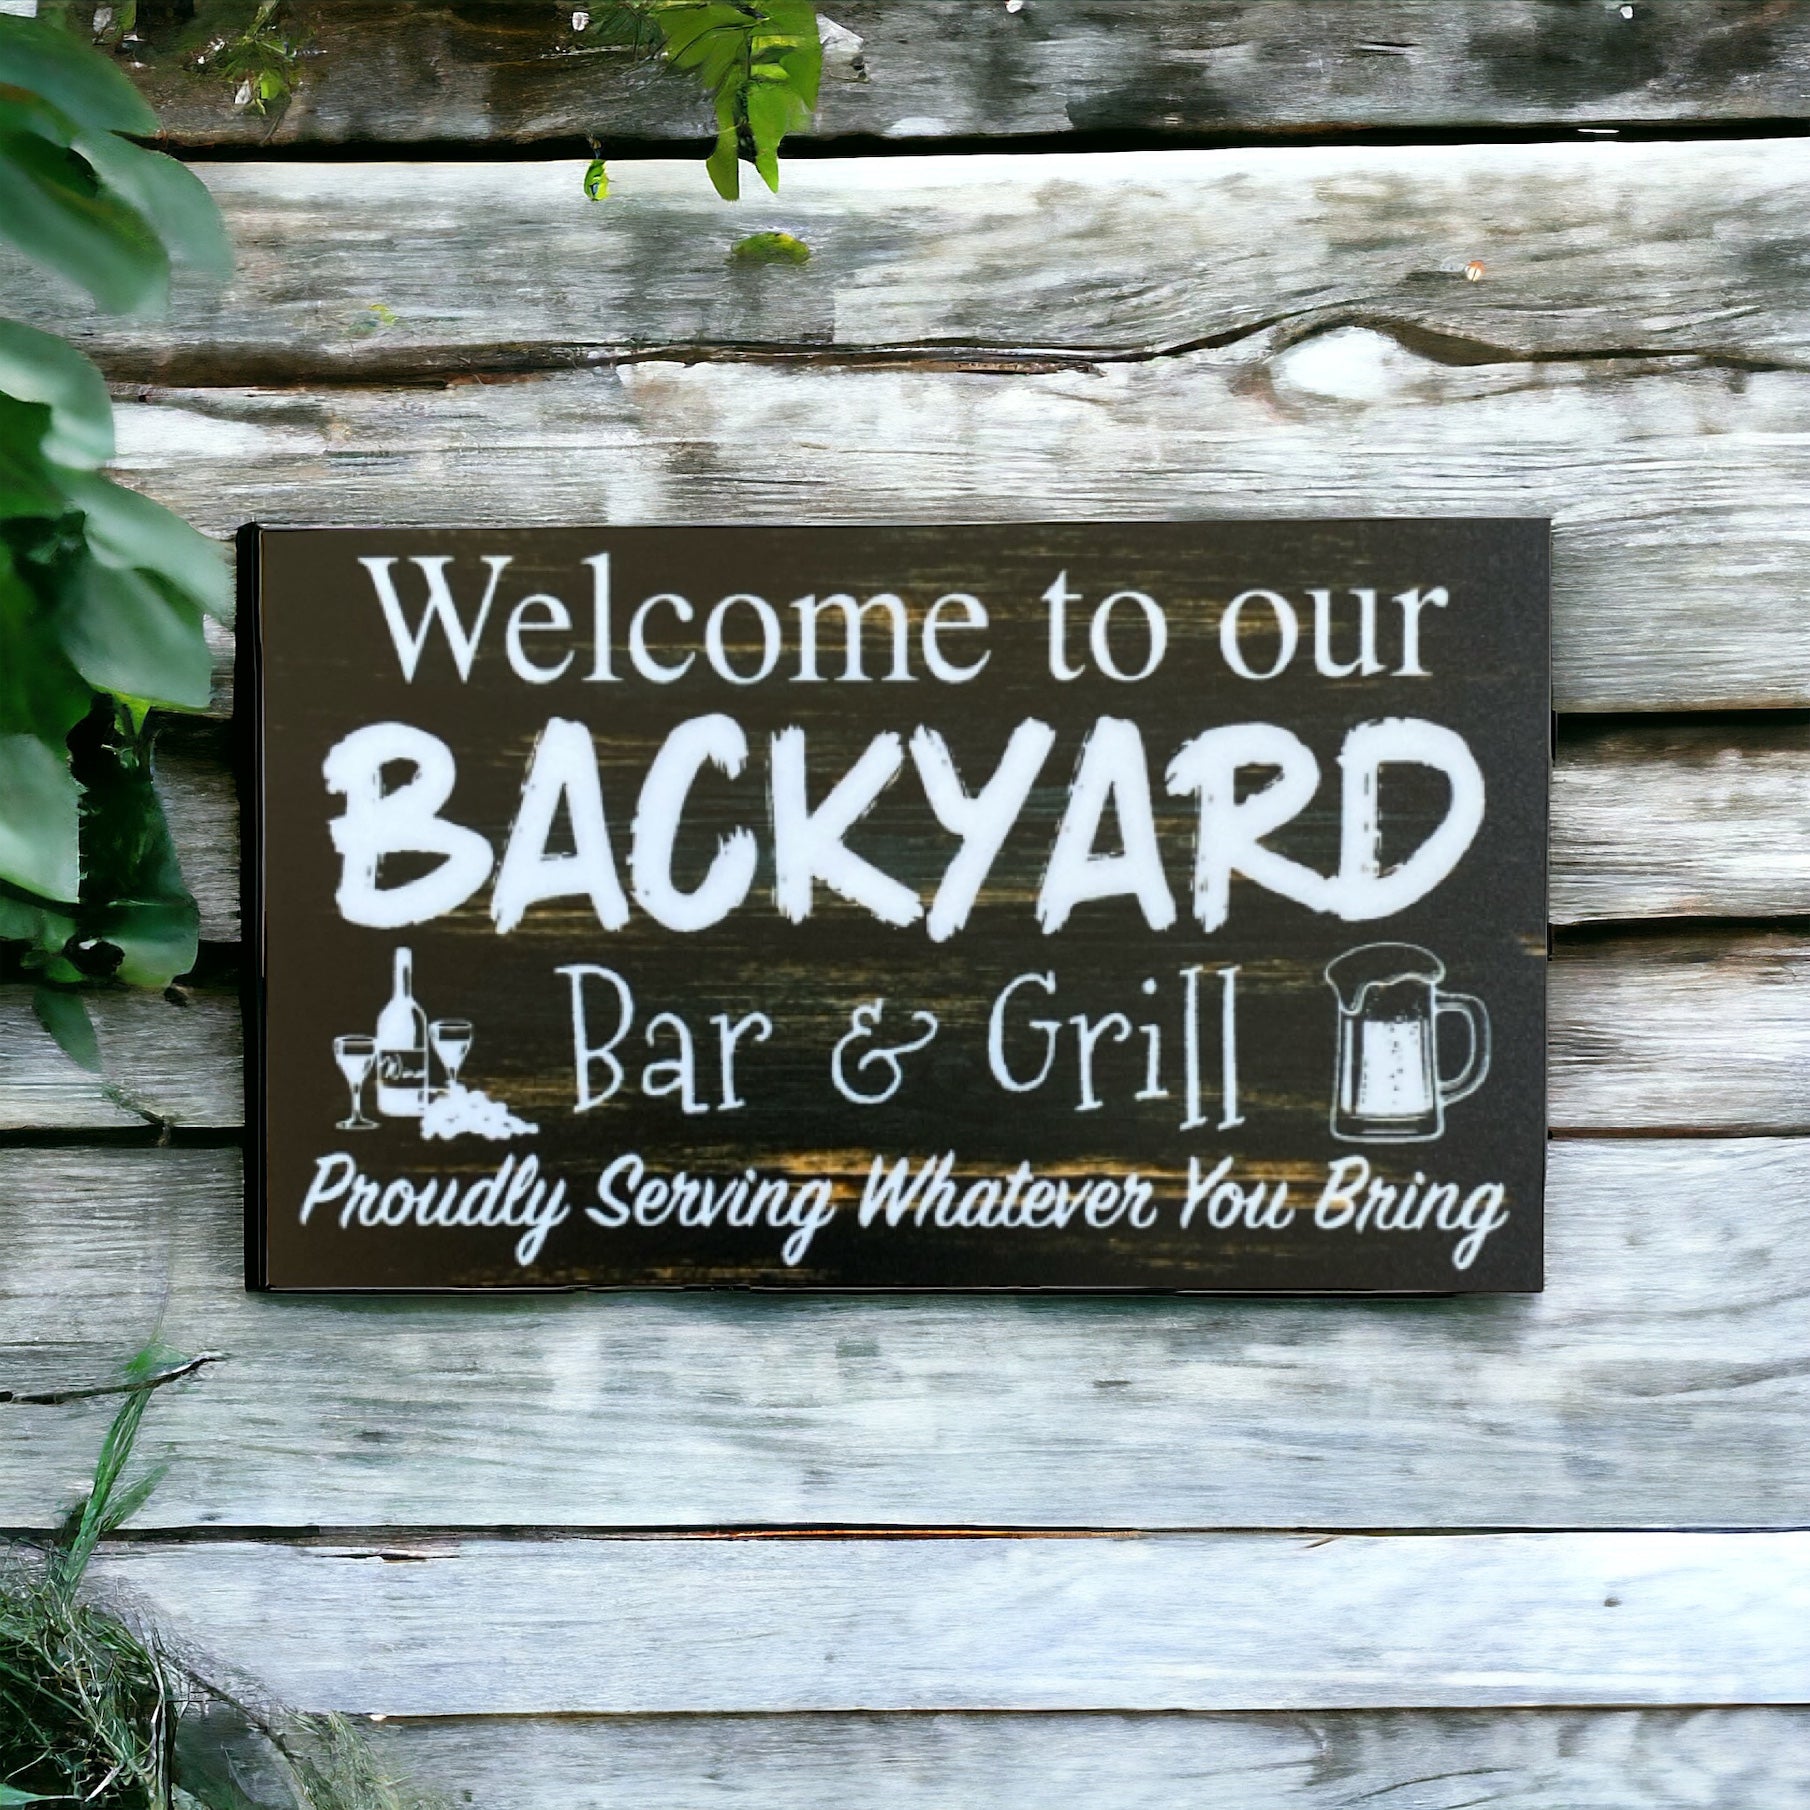 Welcome Backyard Bar Grill Serving What You Bring Sign - The Renmy Store Homewares & Gifts 